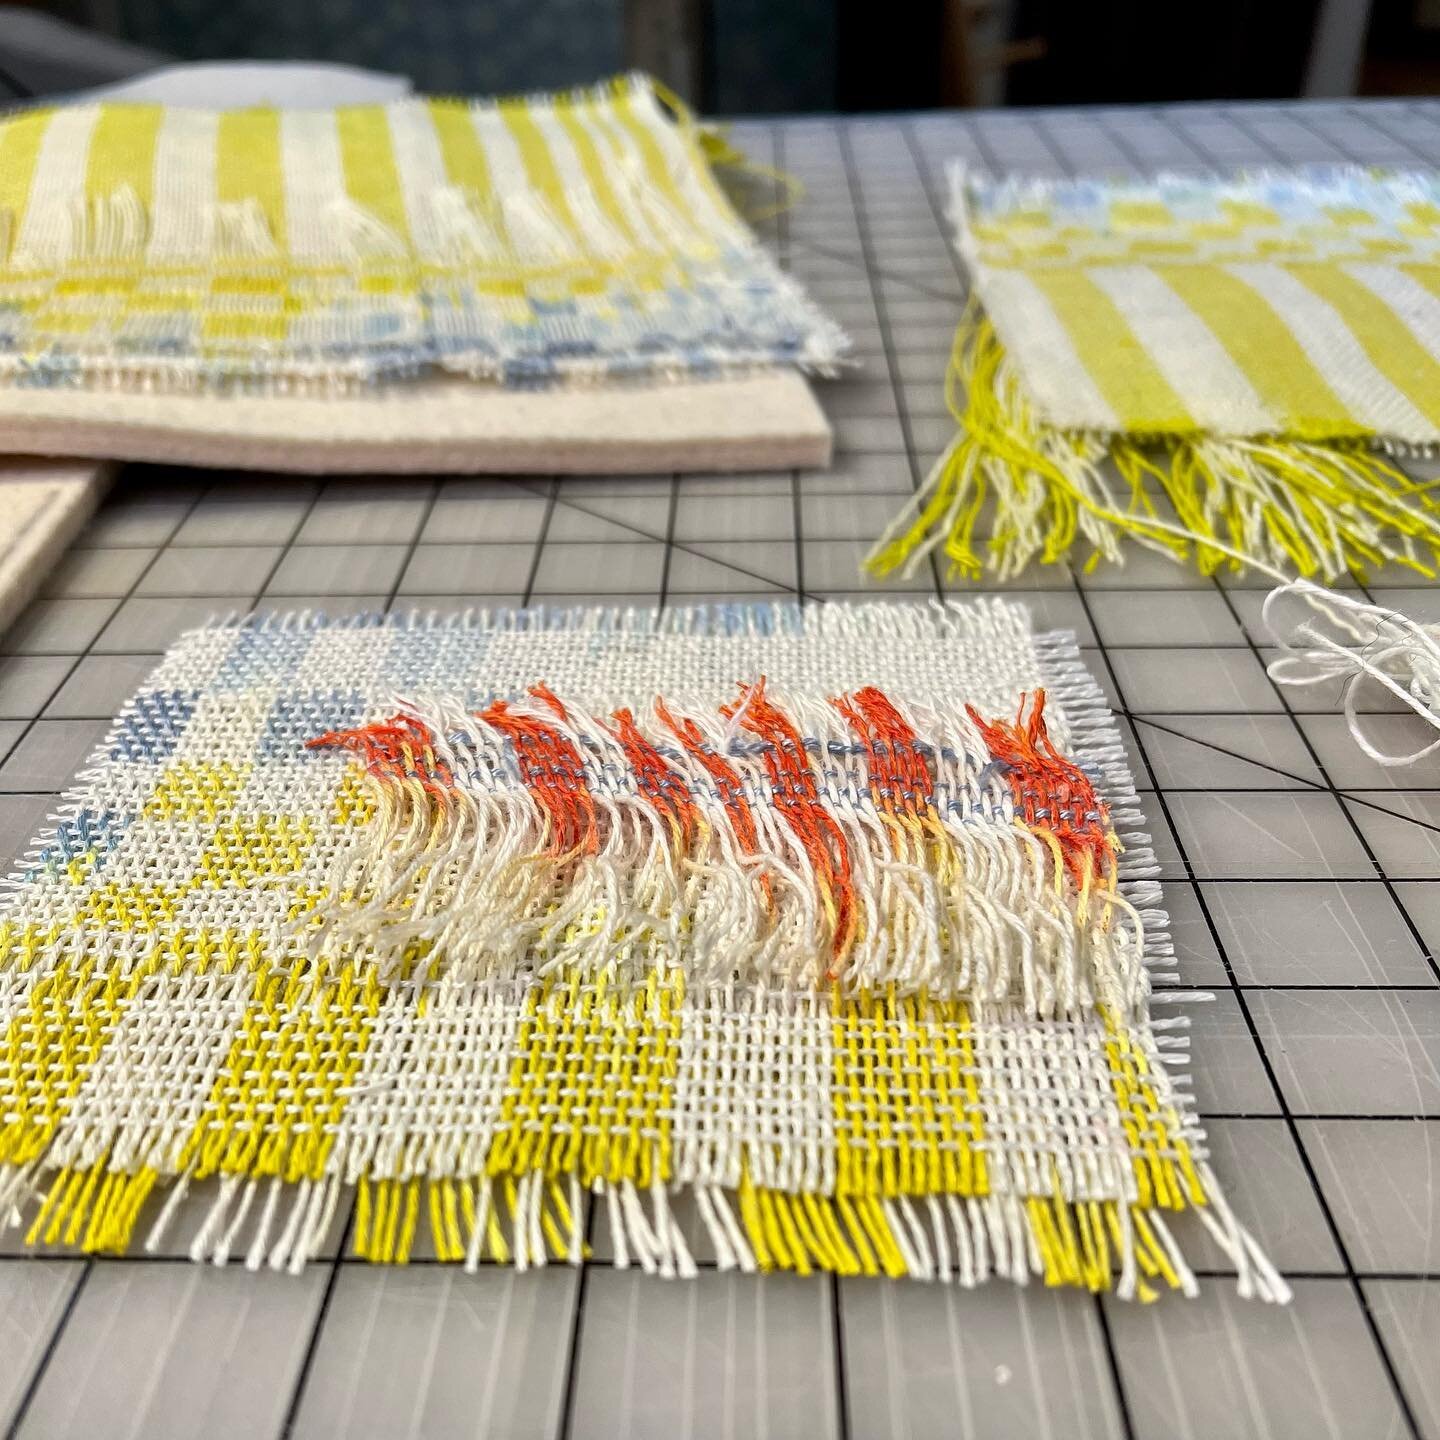 A year of loom waste saved for this exciting project. I look forward to this all year long. #recycle #loom #thrums #scrapart